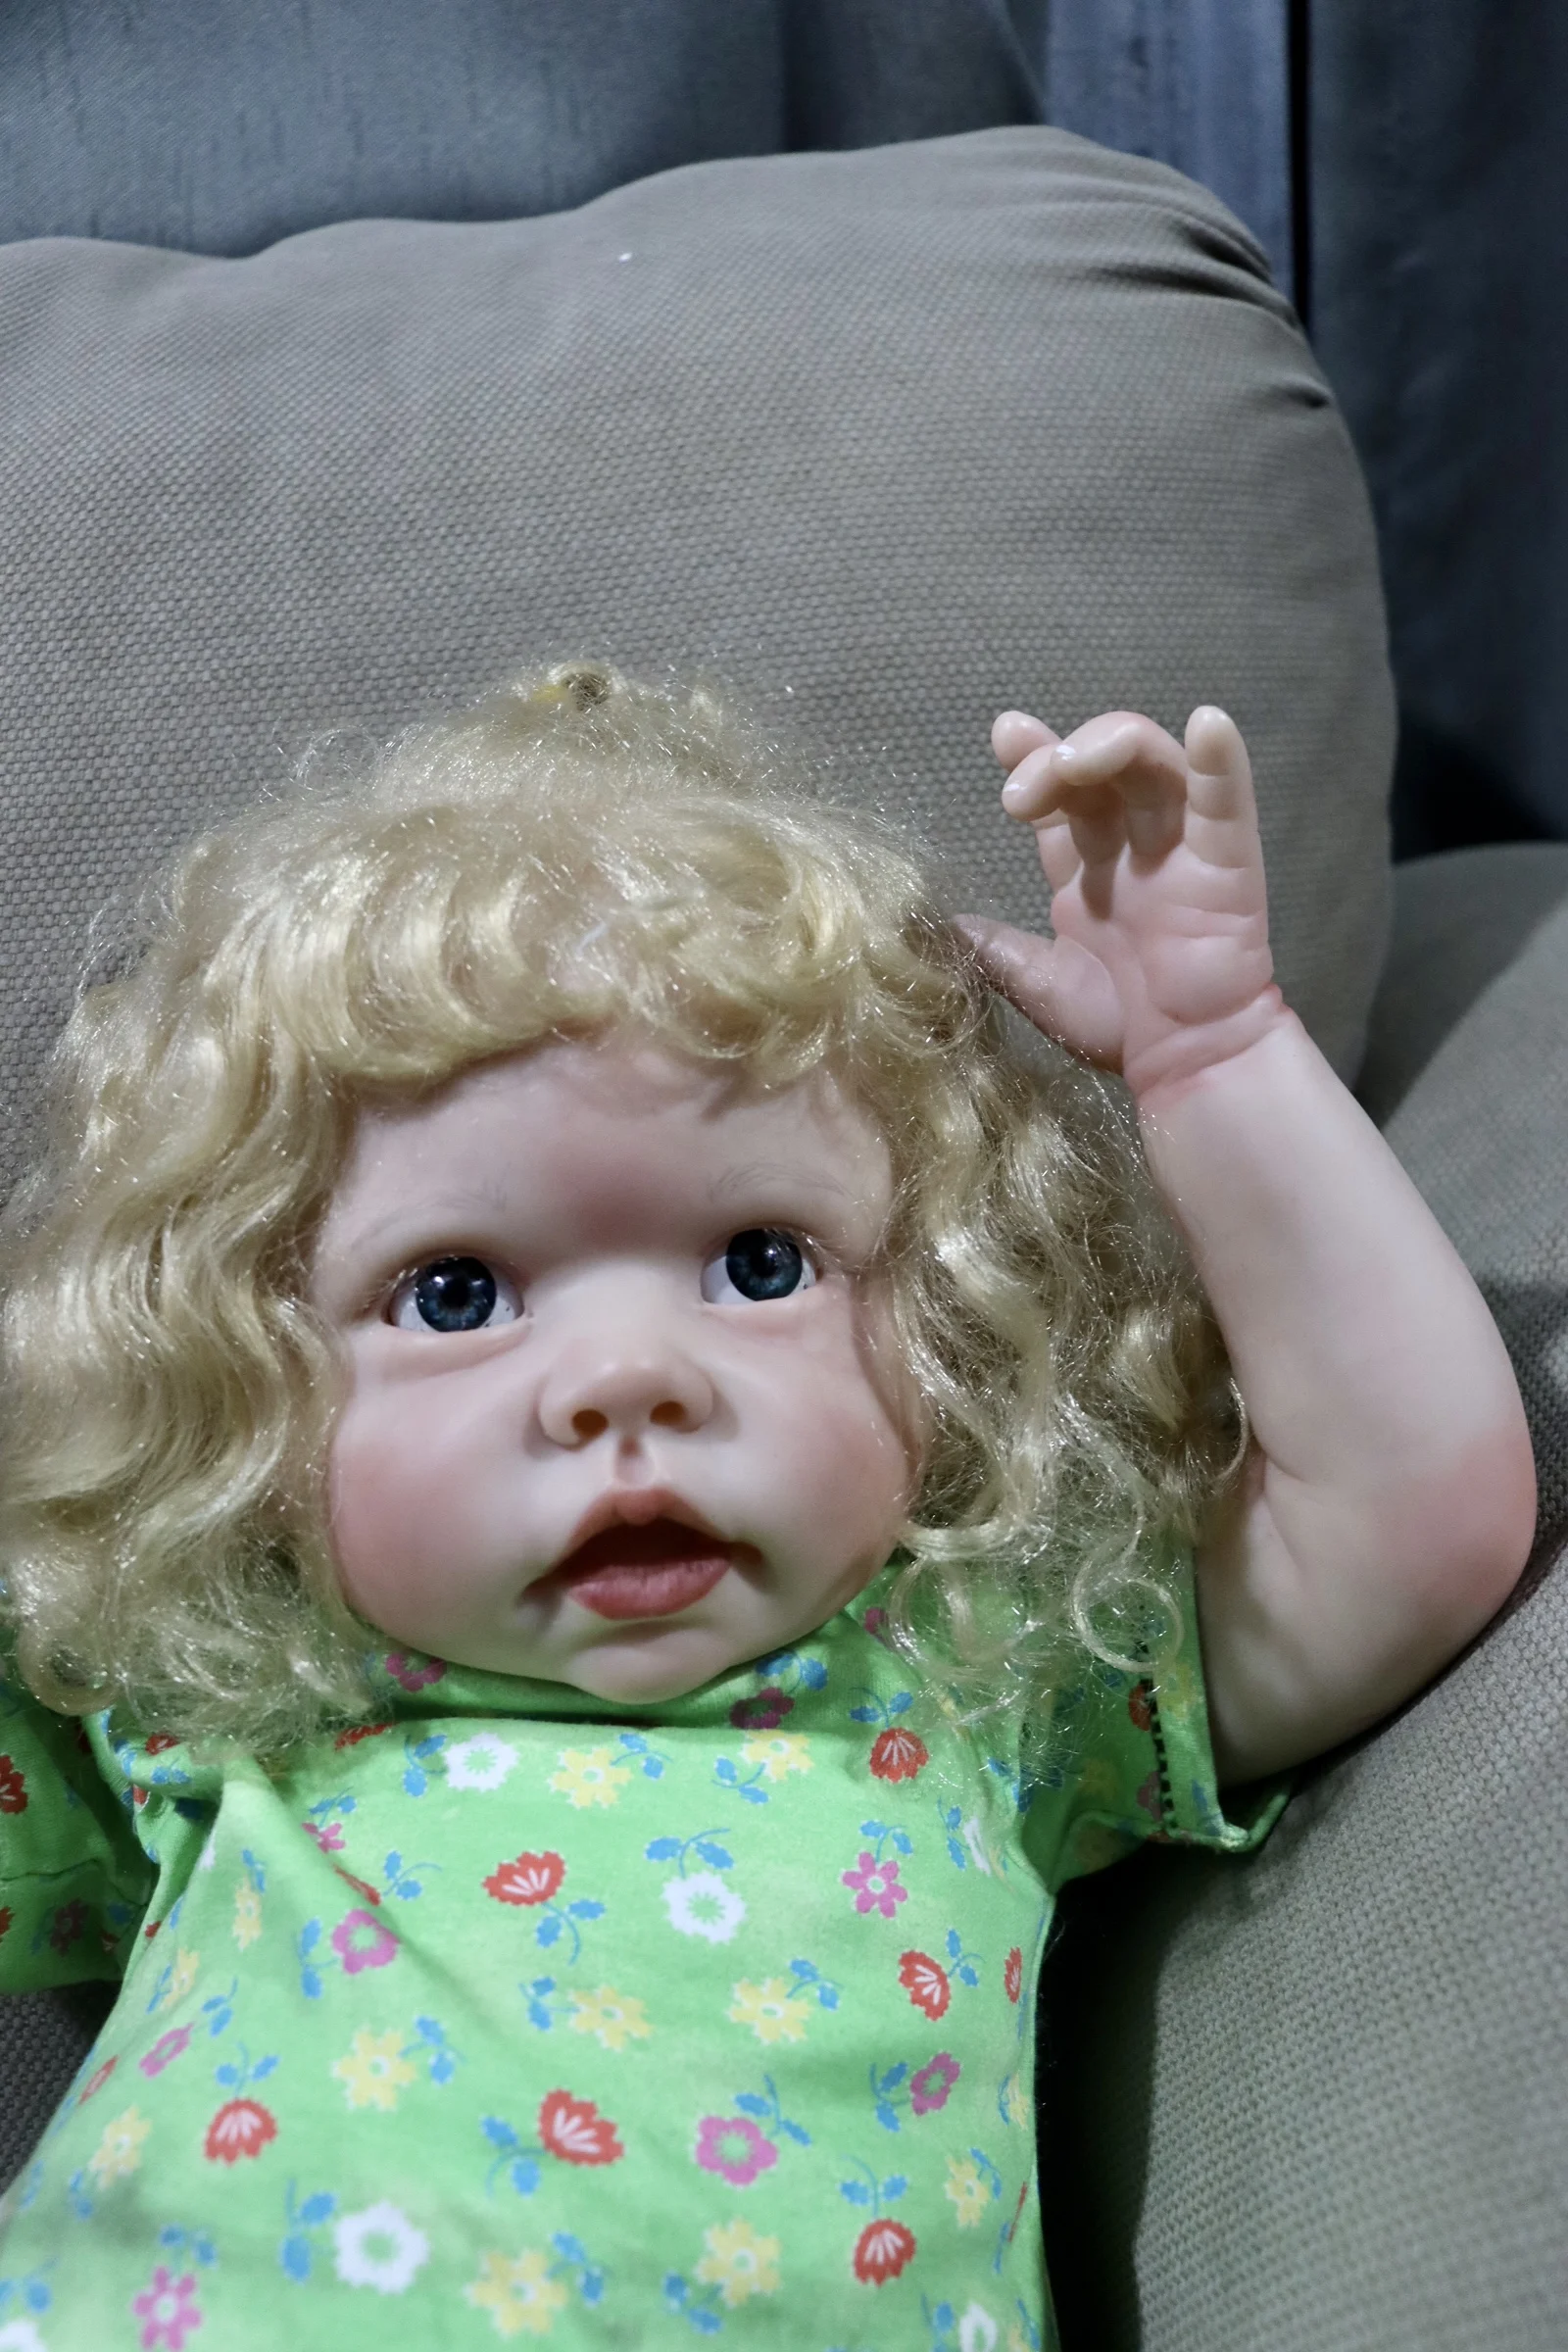 

FBBD 84cm Bebe Reborn Already Finished Doll Tippi With Hand-Rooted Hair By Artist Dolls For Girl Toys For Children Real Art Doll